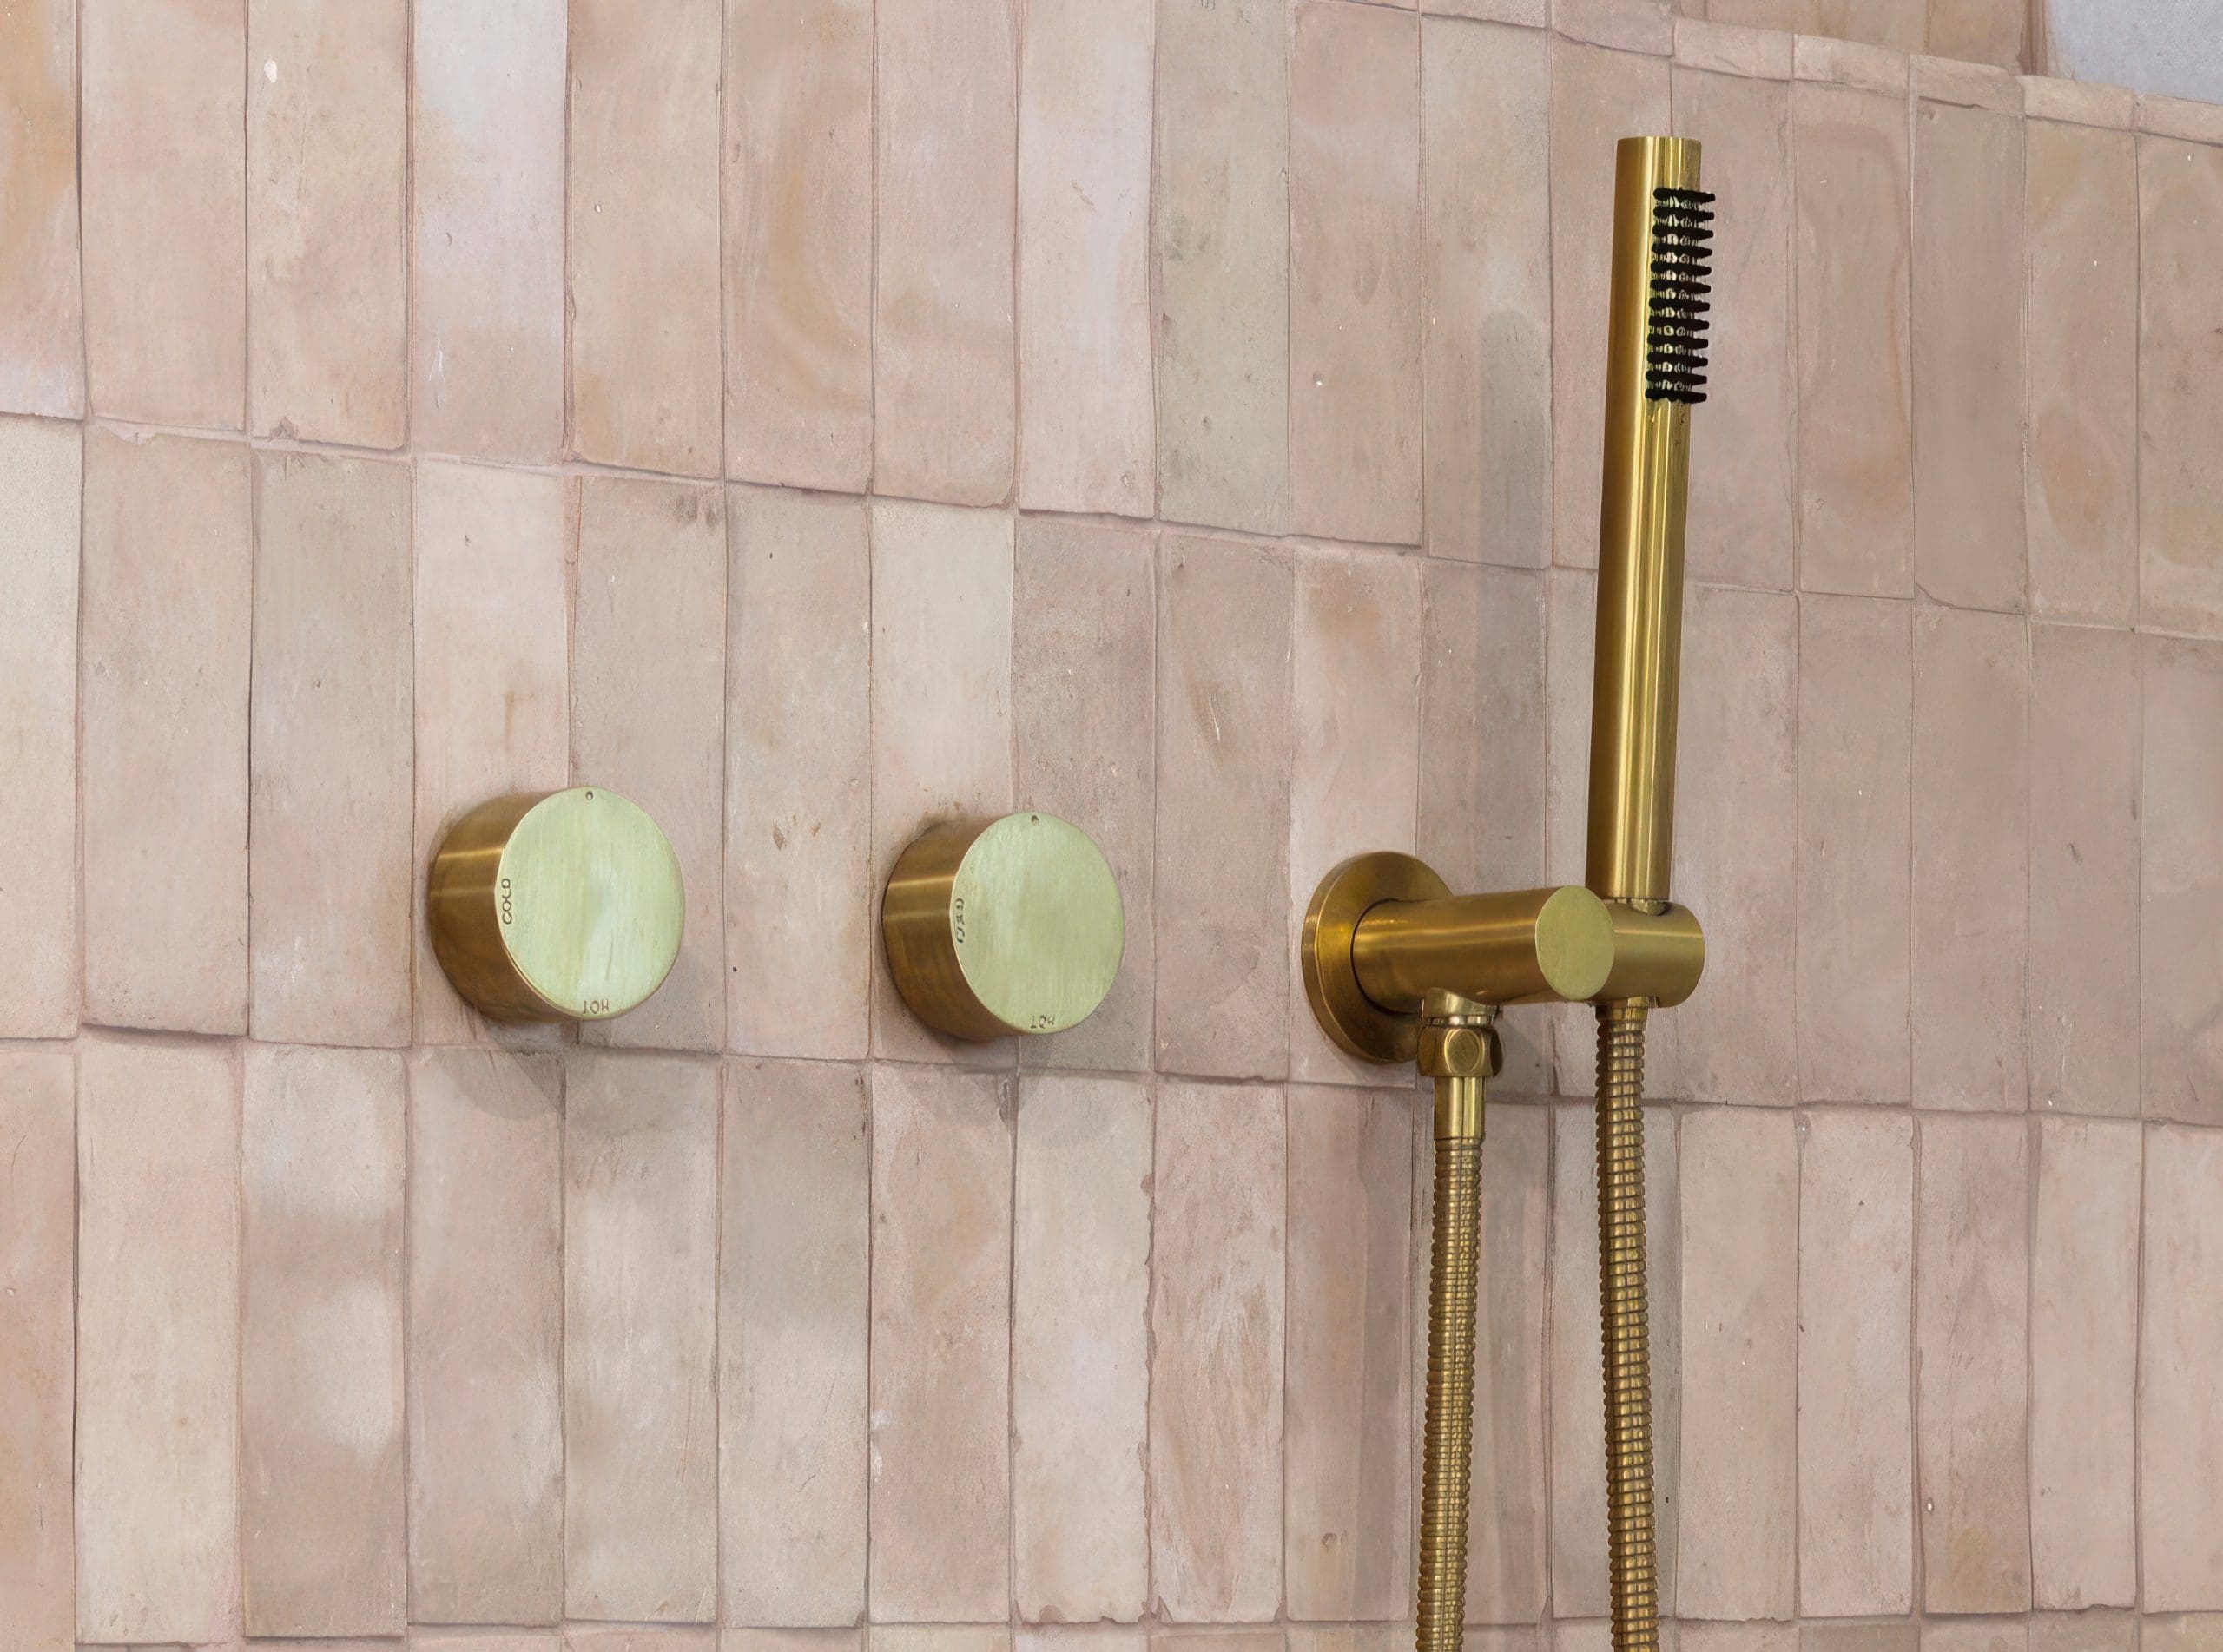 TAHA TERRACOTTA BATONS_RMS TRADERS_NATURAL STONE PAVER BATHROOM TILE SUPPLIER FEATURE WALL TEXTURED TILE SUPPLIER MELBOURNE (9)x